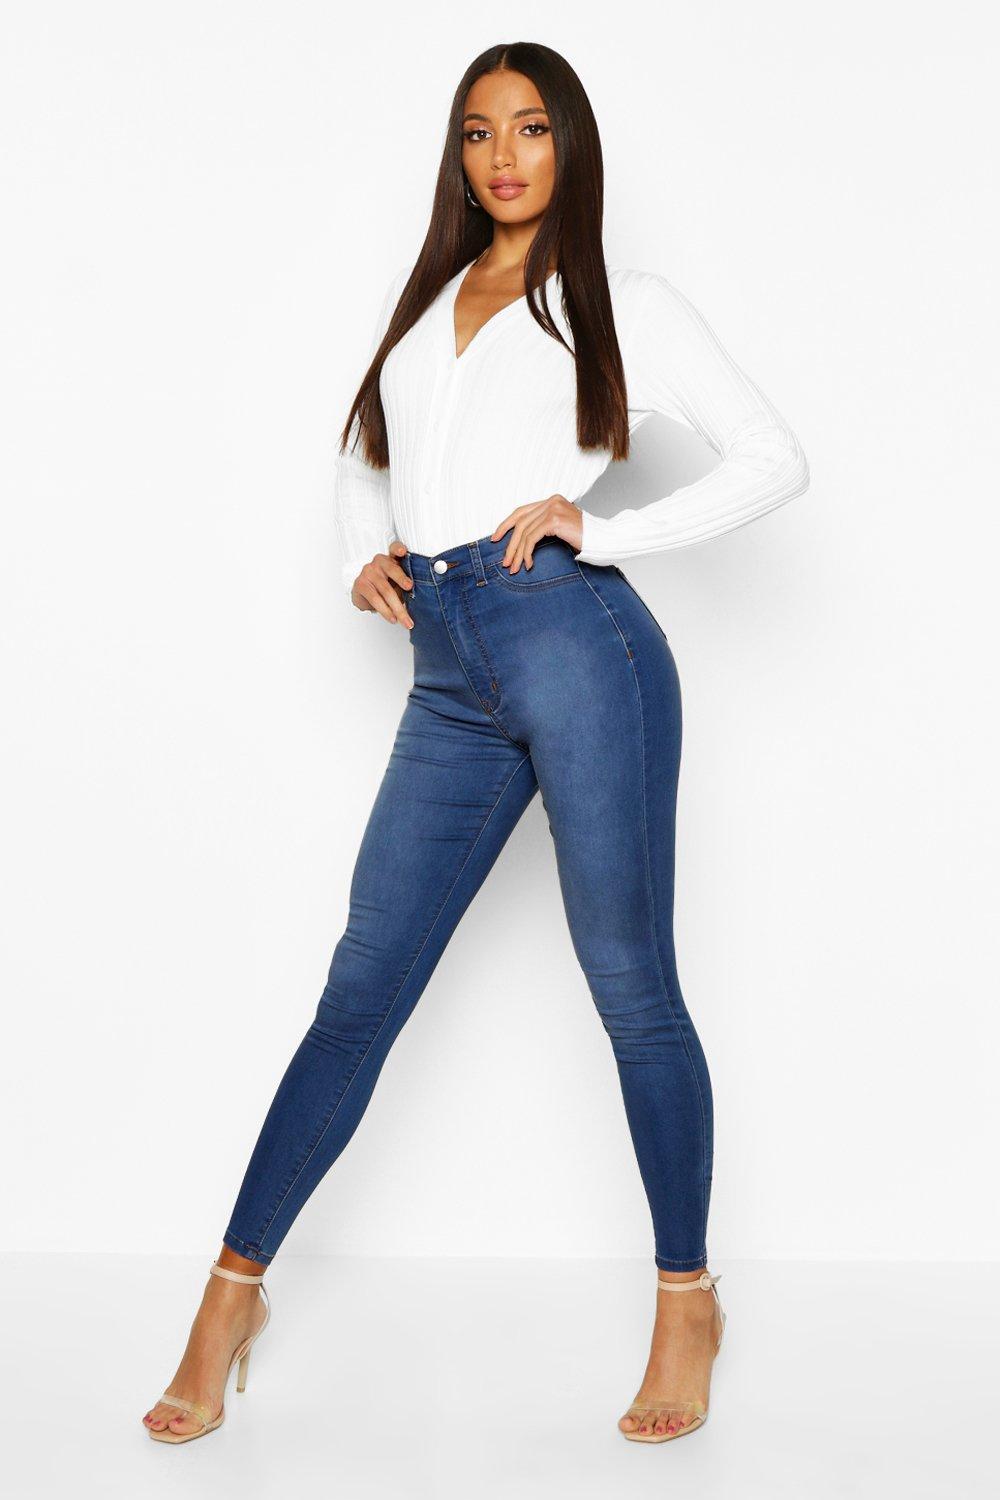 Big Ass High Waist Jeans for Women 2023 New Strecth Skinny Jeans